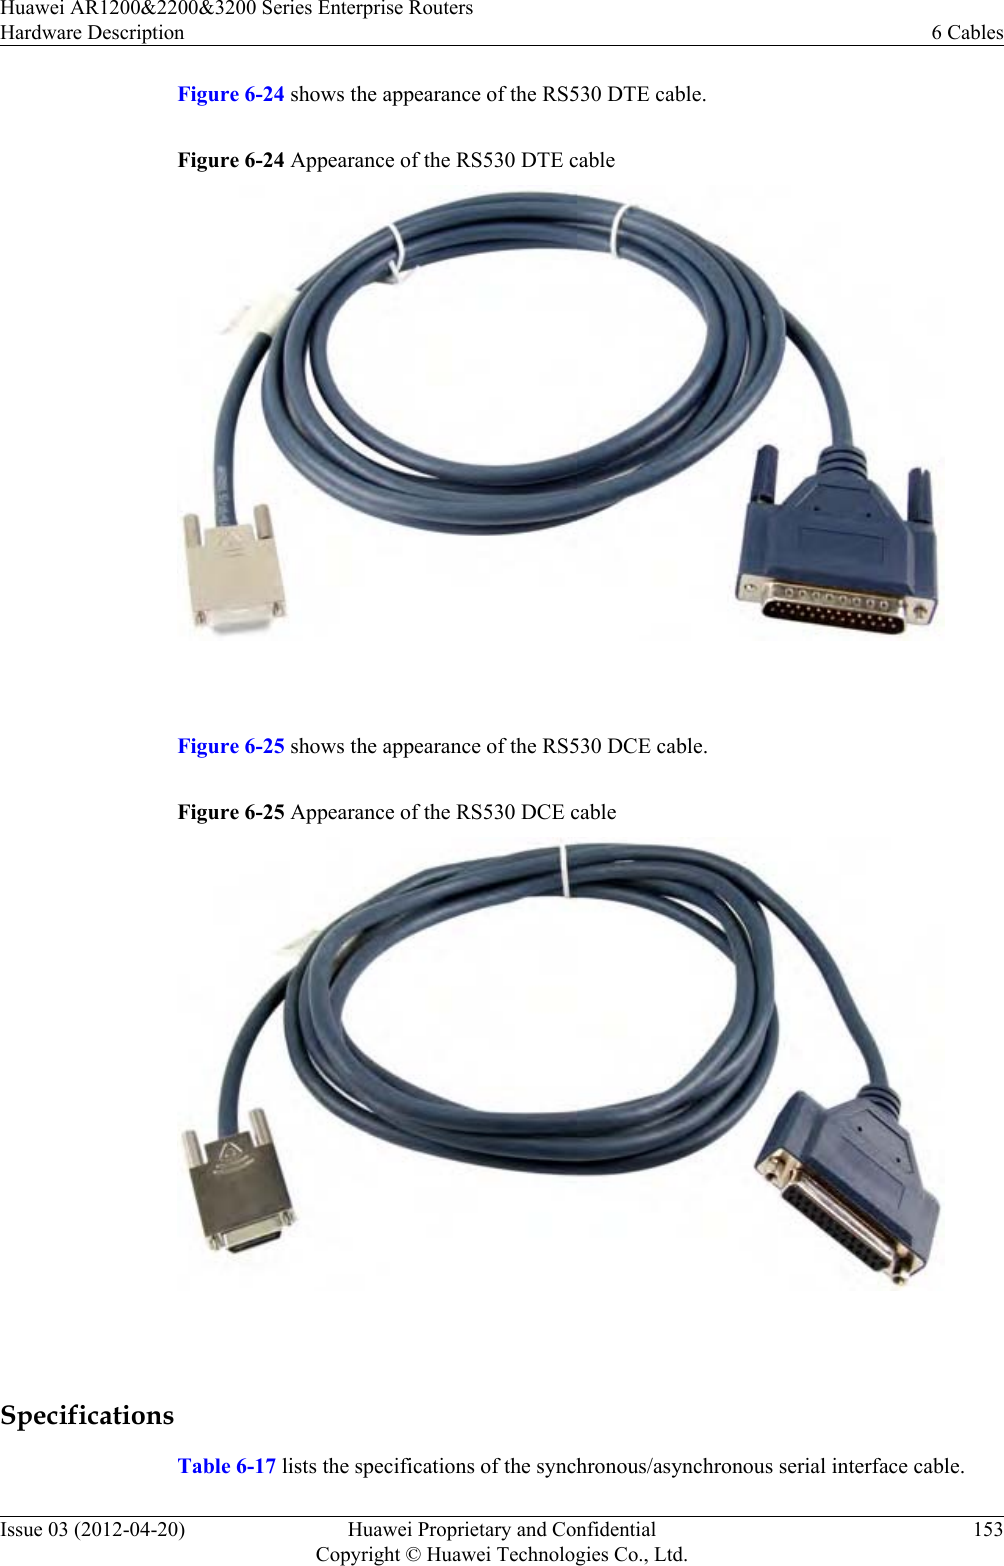 Figure 6-24 shows the appearance of the RS530 DTE cable.Figure 6-24 Appearance of the RS530 DTE cable Figure 6-25 shows the appearance of the RS530 DCE cable.Figure 6-25 Appearance of the RS530 DCE cable SpecificationsTable 6-17 lists the specifications of the synchronous/asynchronous serial interface cable.Huawei AR1200&amp;2200&amp;3200 Series Enterprise RoutersHardware Description 6 CablesIssue 03 (2012-04-20) Huawei Proprietary and ConfidentialCopyright © Huawei Technologies Co., Ltd.153